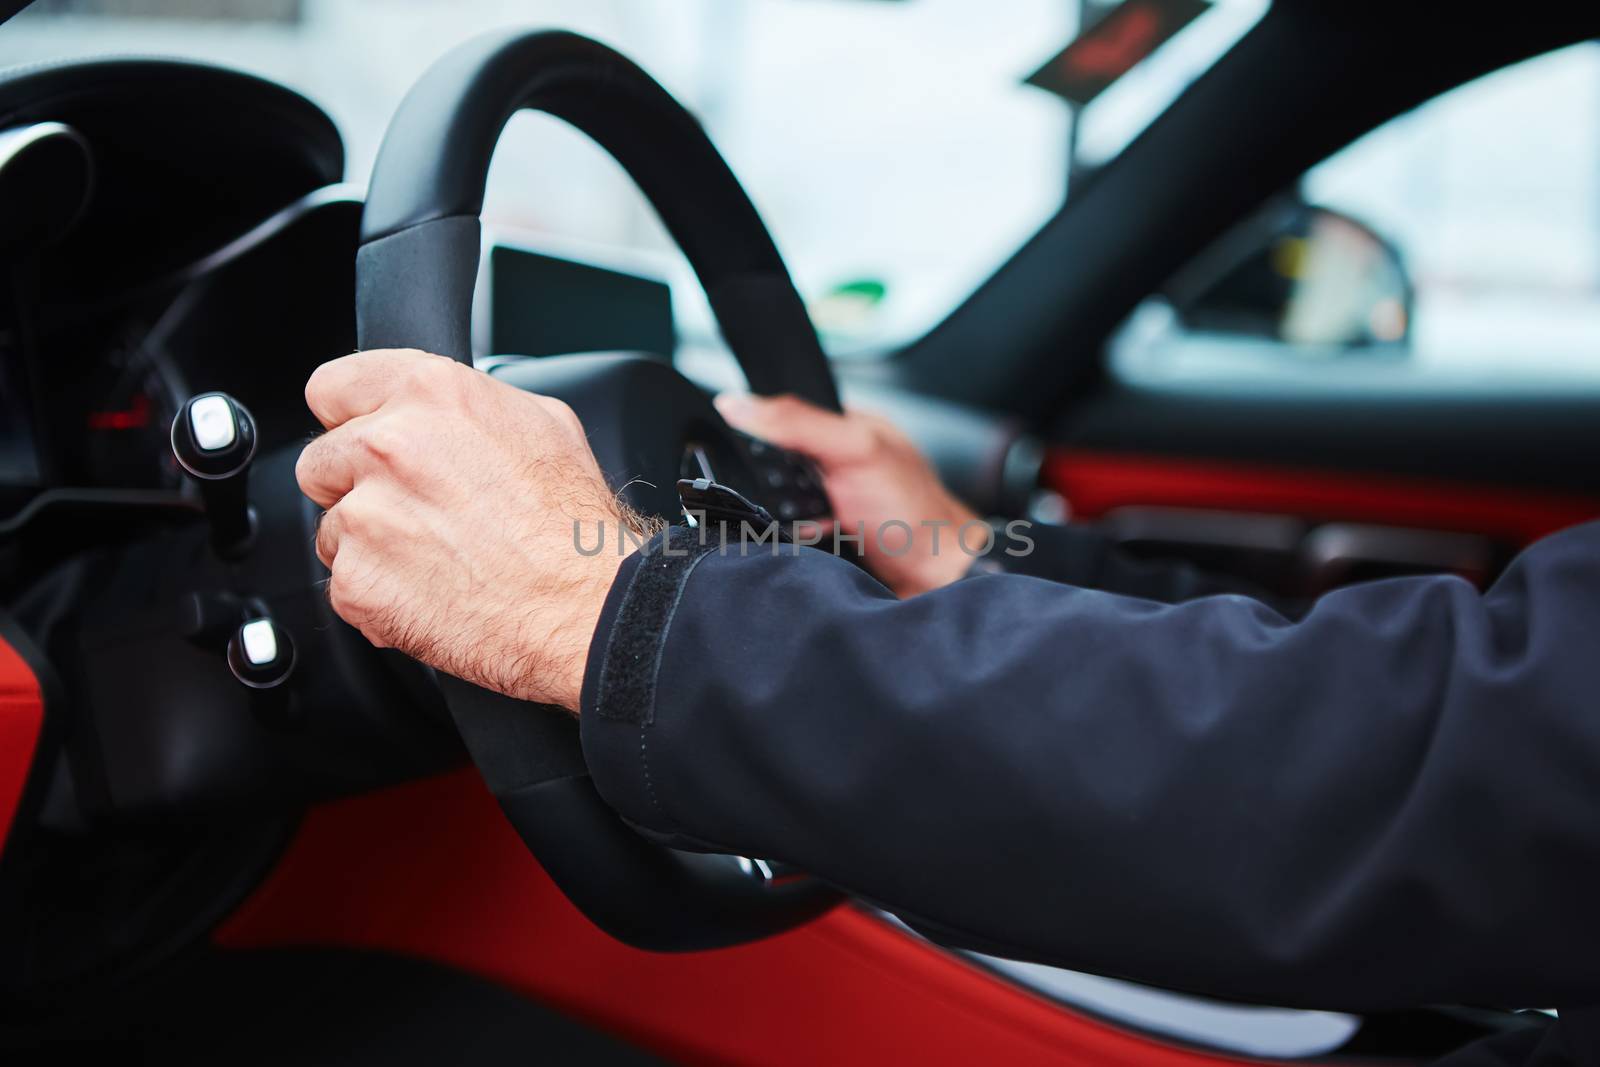 The male driver hands holding steering wheel